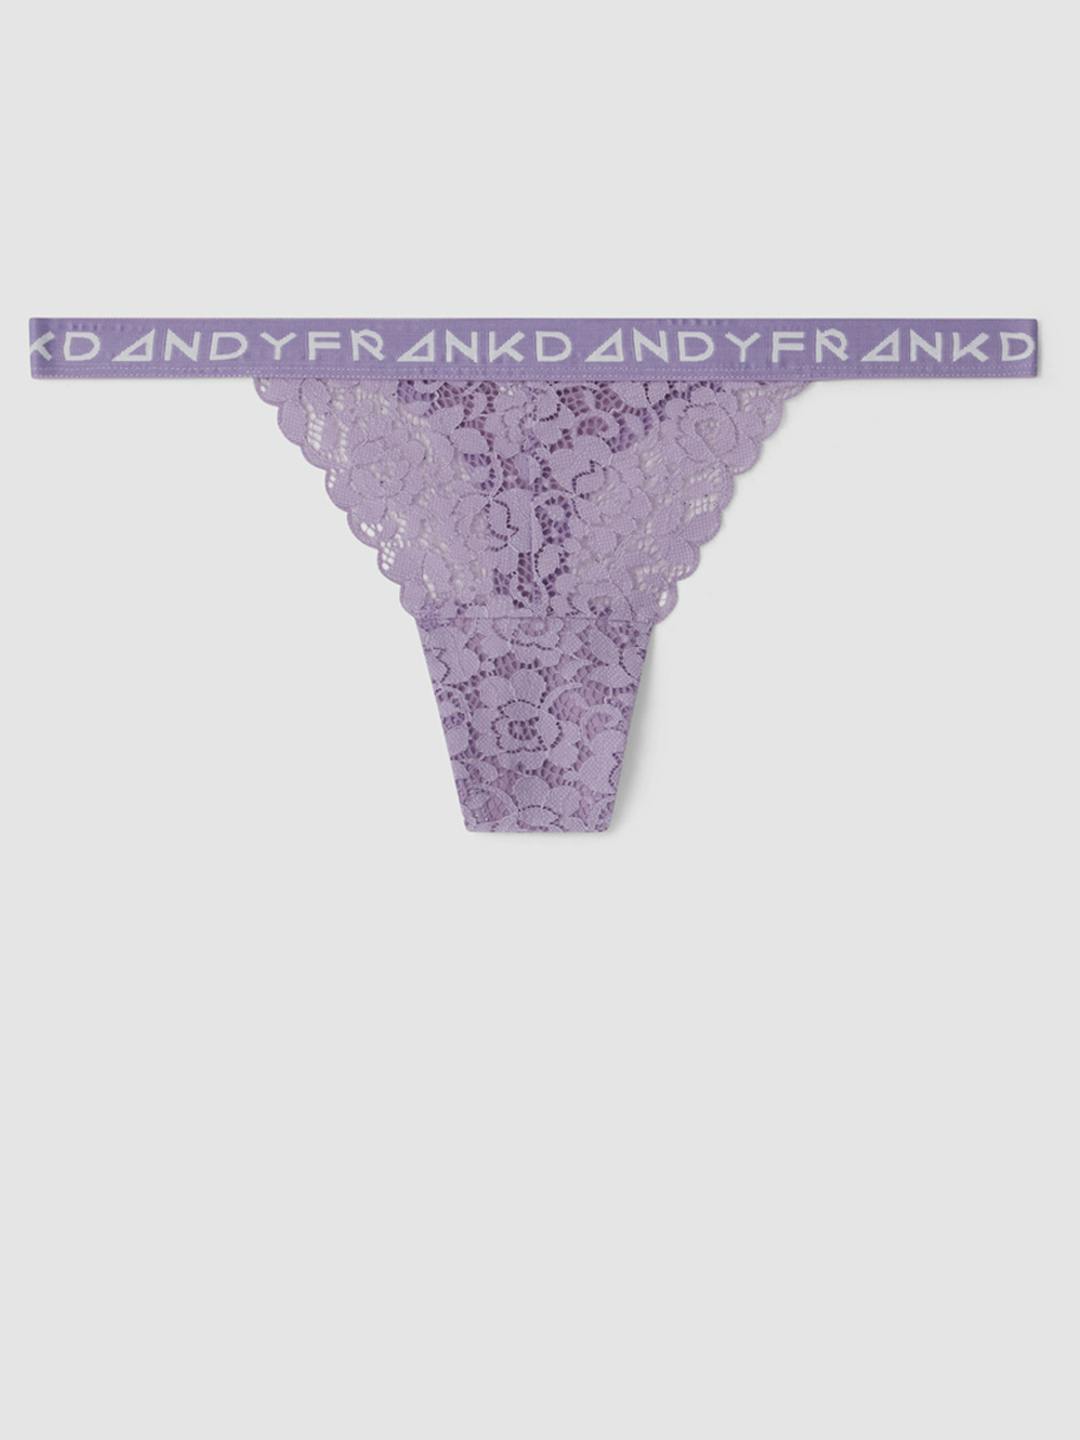 https://frankdandy.com/_next/image?url=https%3A%2F%2Ffrankdandy.centracdn.net%2Fclient%2Fdynamic%2Fimages%2F7256_86ad182d99-lace-thong-lilac-large.jpg&w=3840&q=75